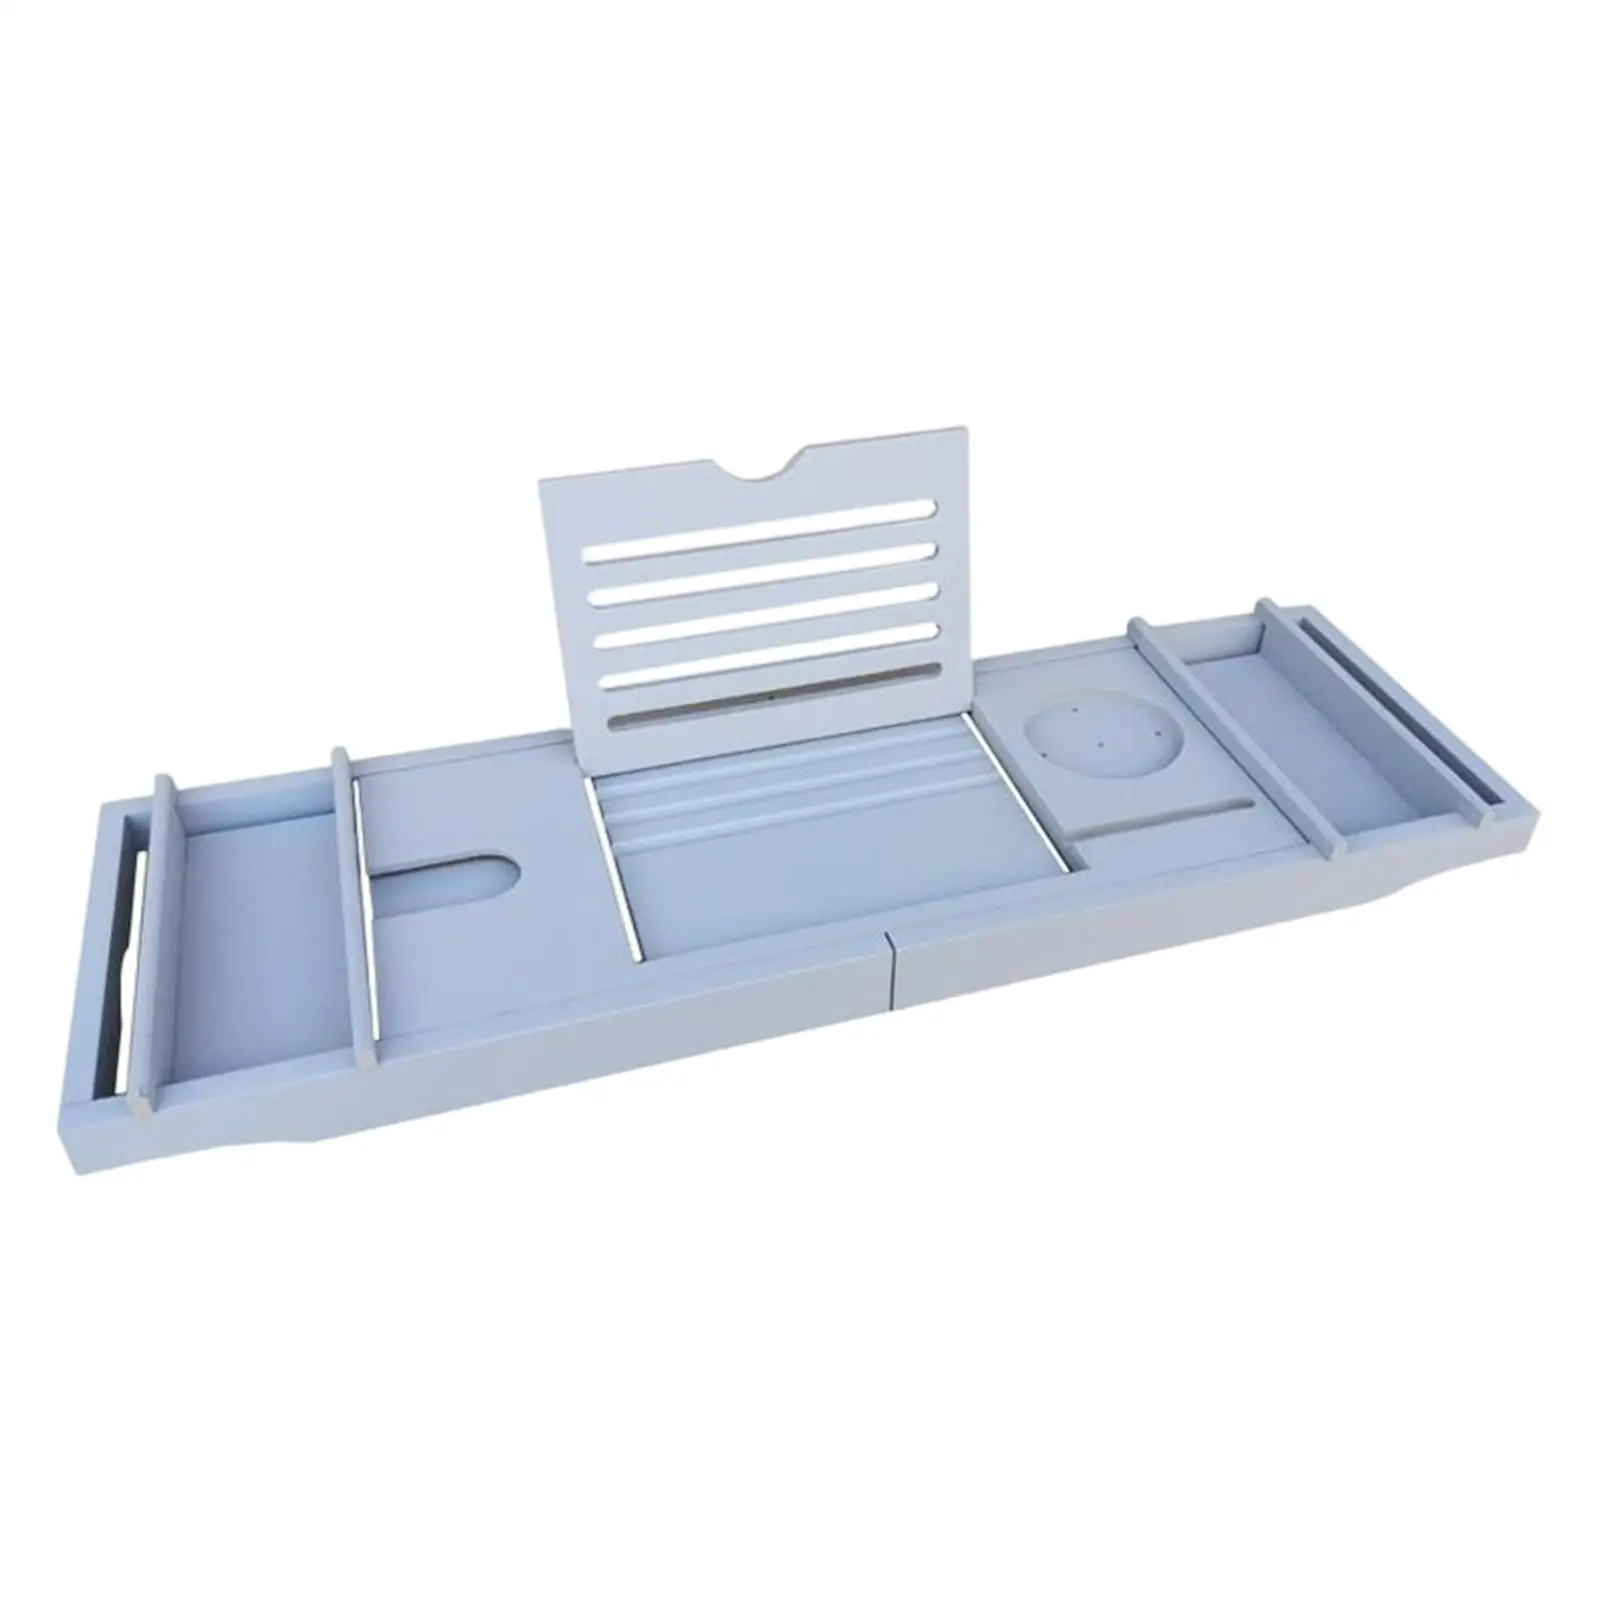 Expandable Tub Tray Bath Tub Tray Drinks Tray Holds Book, Phone, Drinks, Soap,